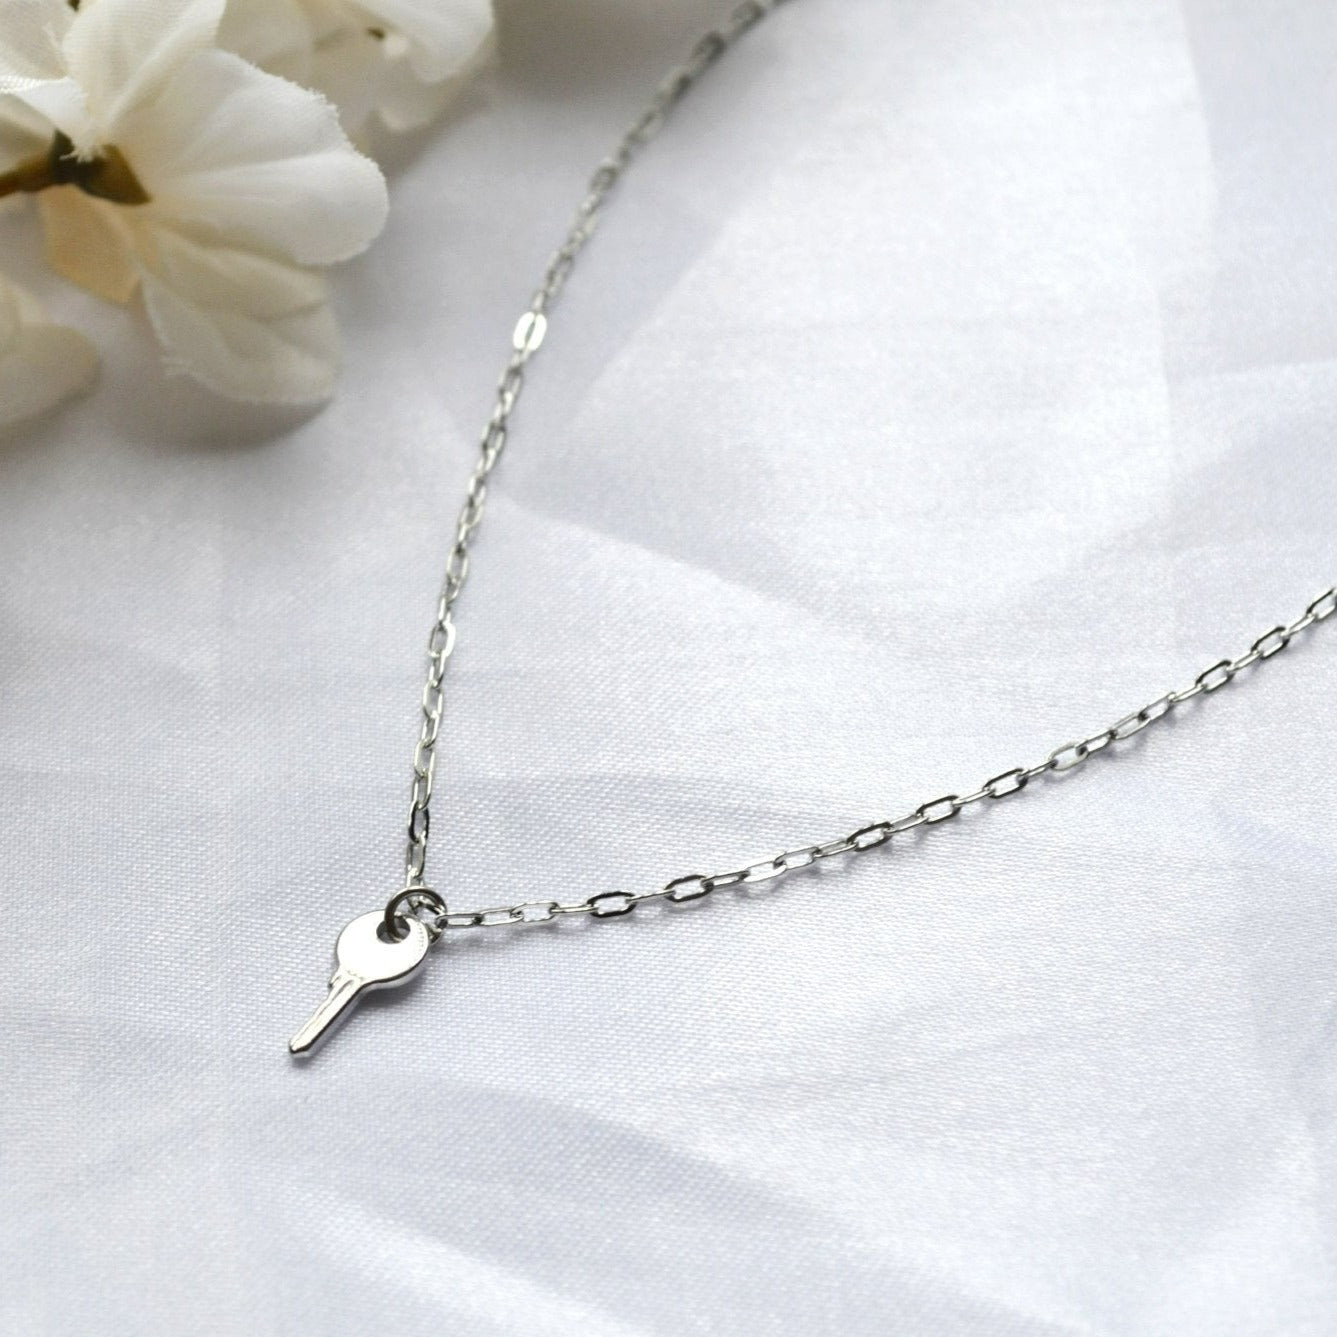 Dainty Silver or Gold Key Pendant Necklace Mini Paperclip Chain For Women - Necklace - Boutique Wear RENN